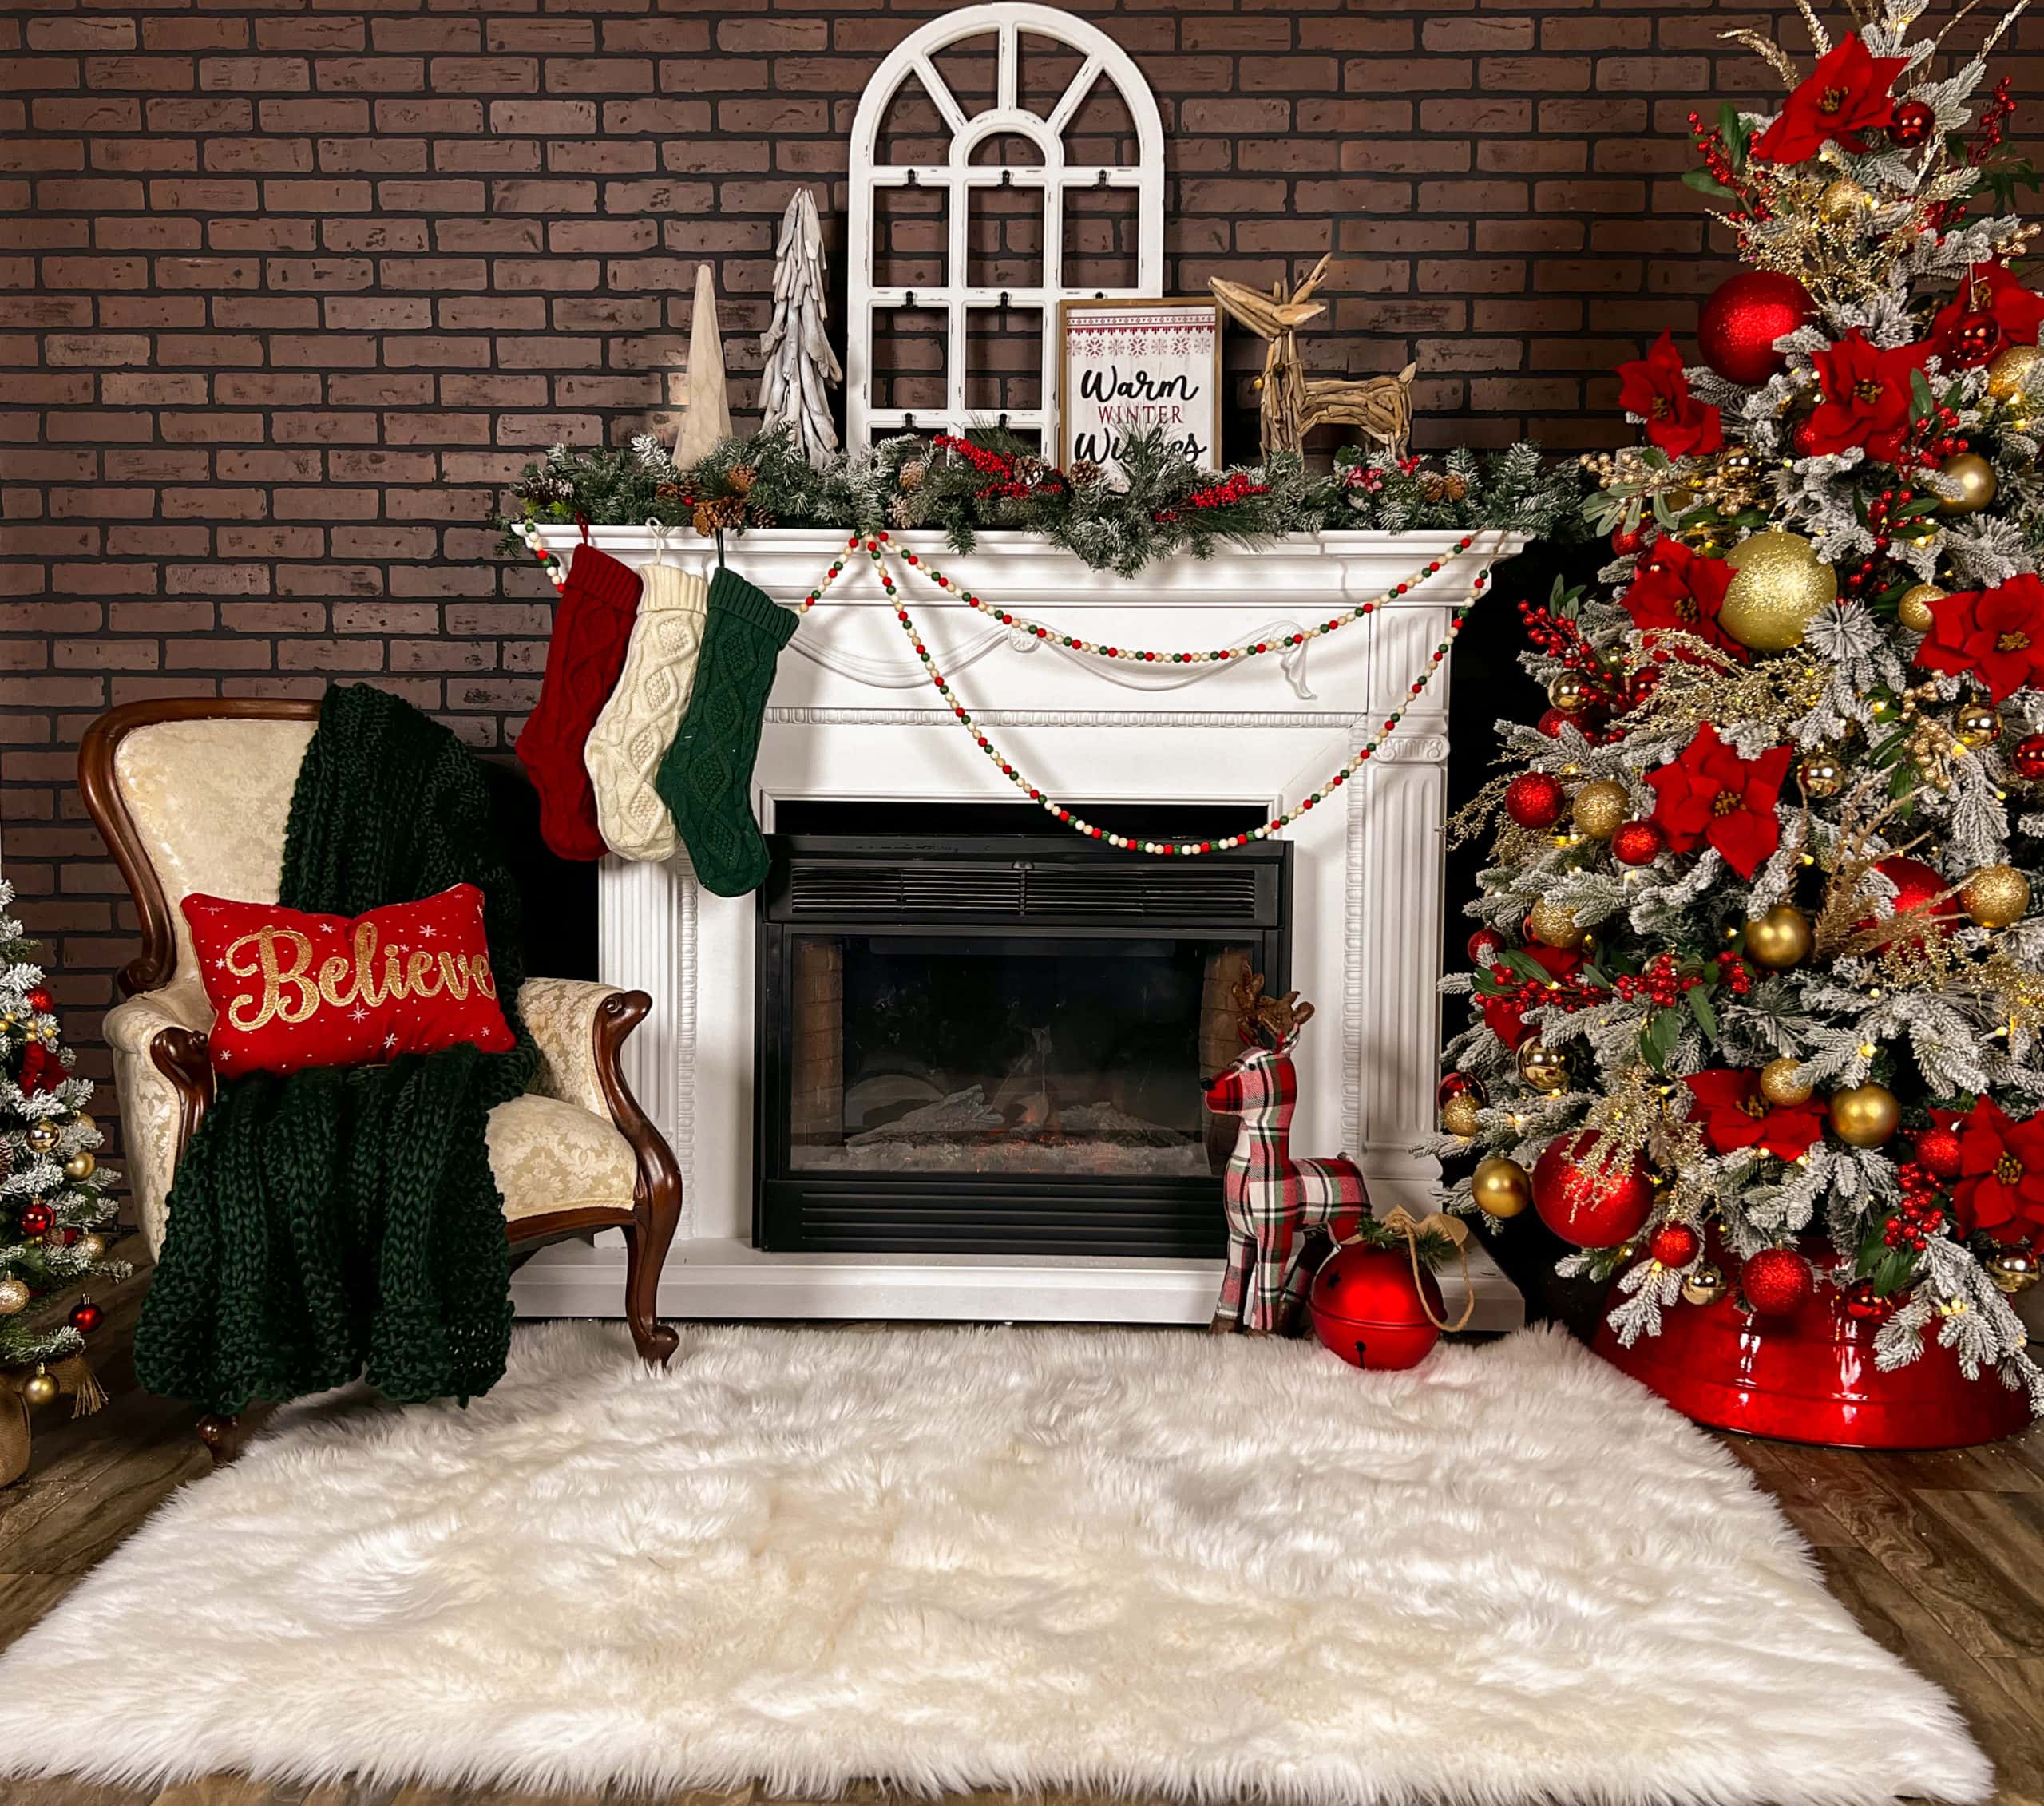 Photograph of a holiday themed photography background, centered by a white fireplace and with a Christmas tree to one side and an antique chair to the other side